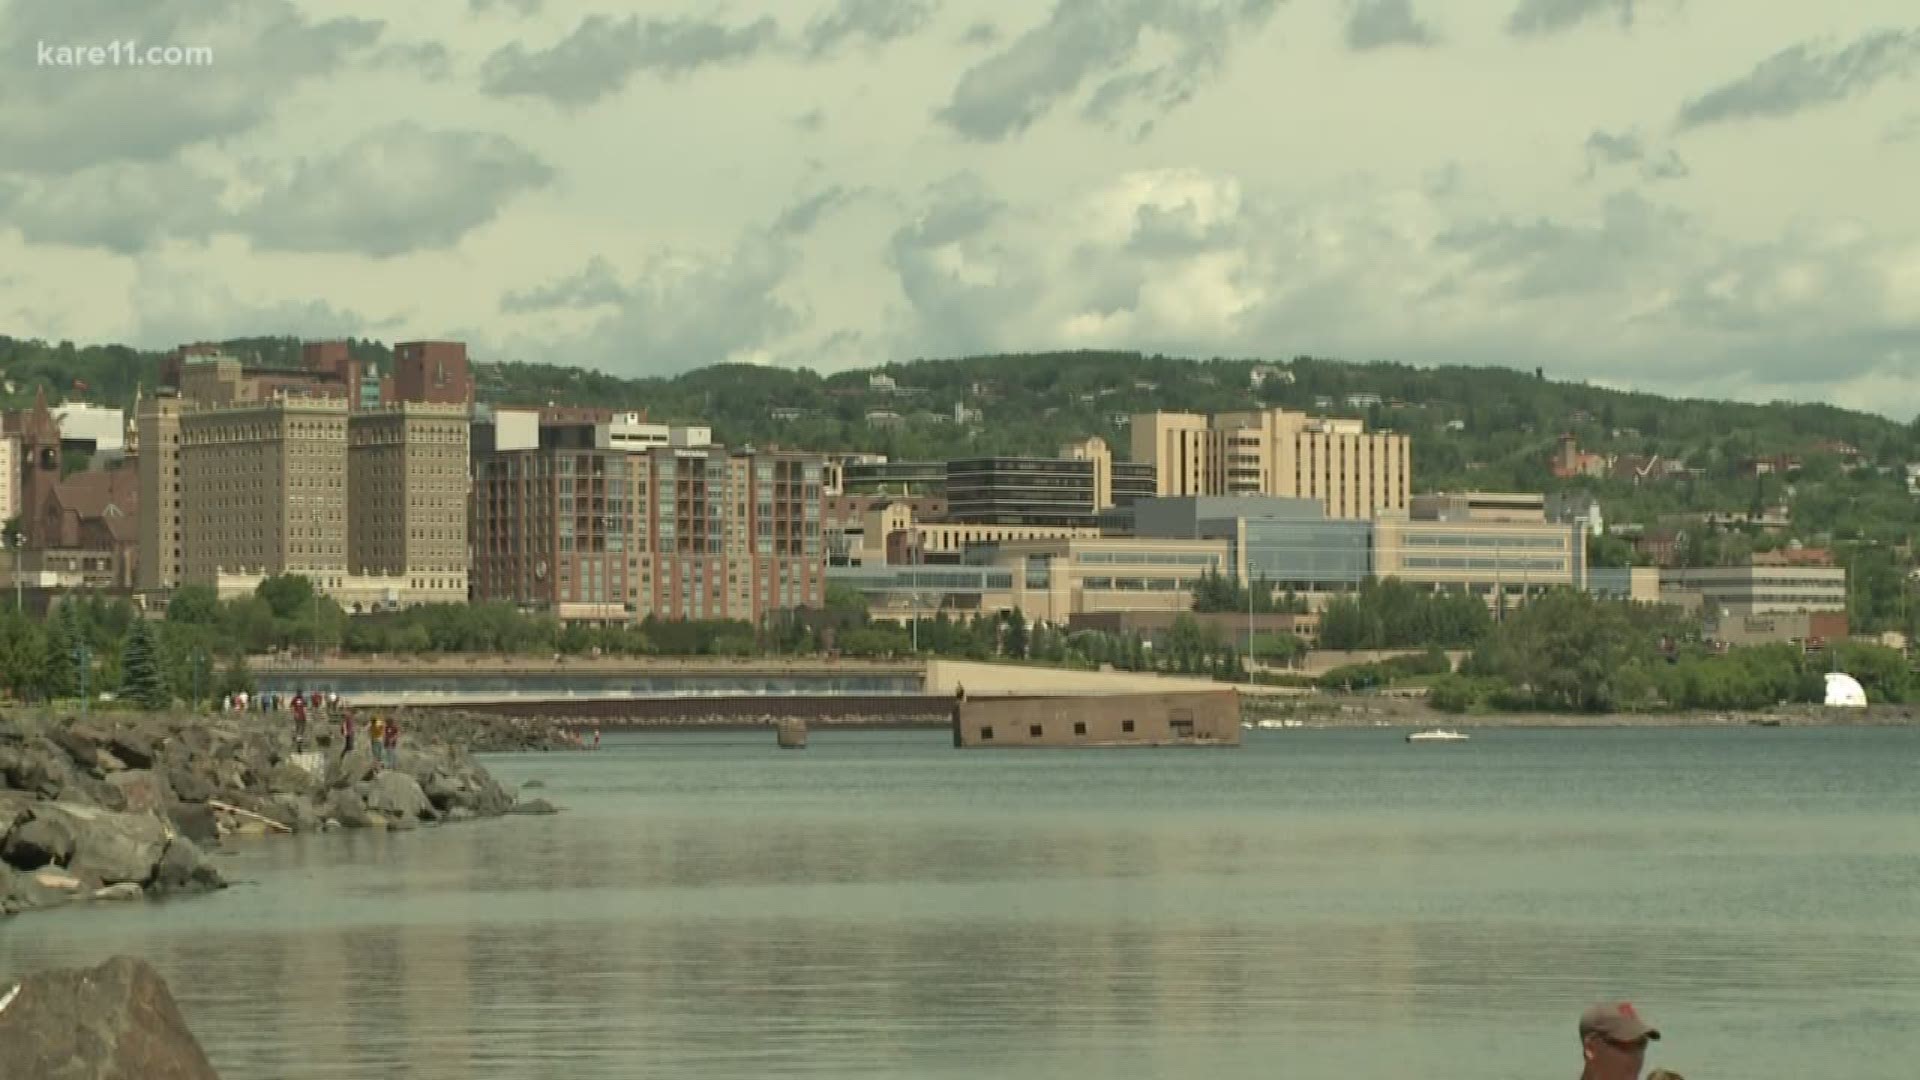 A report finds that Duluth is among the Top 10 cities for millennials. It is affordable for millennial home buyers.